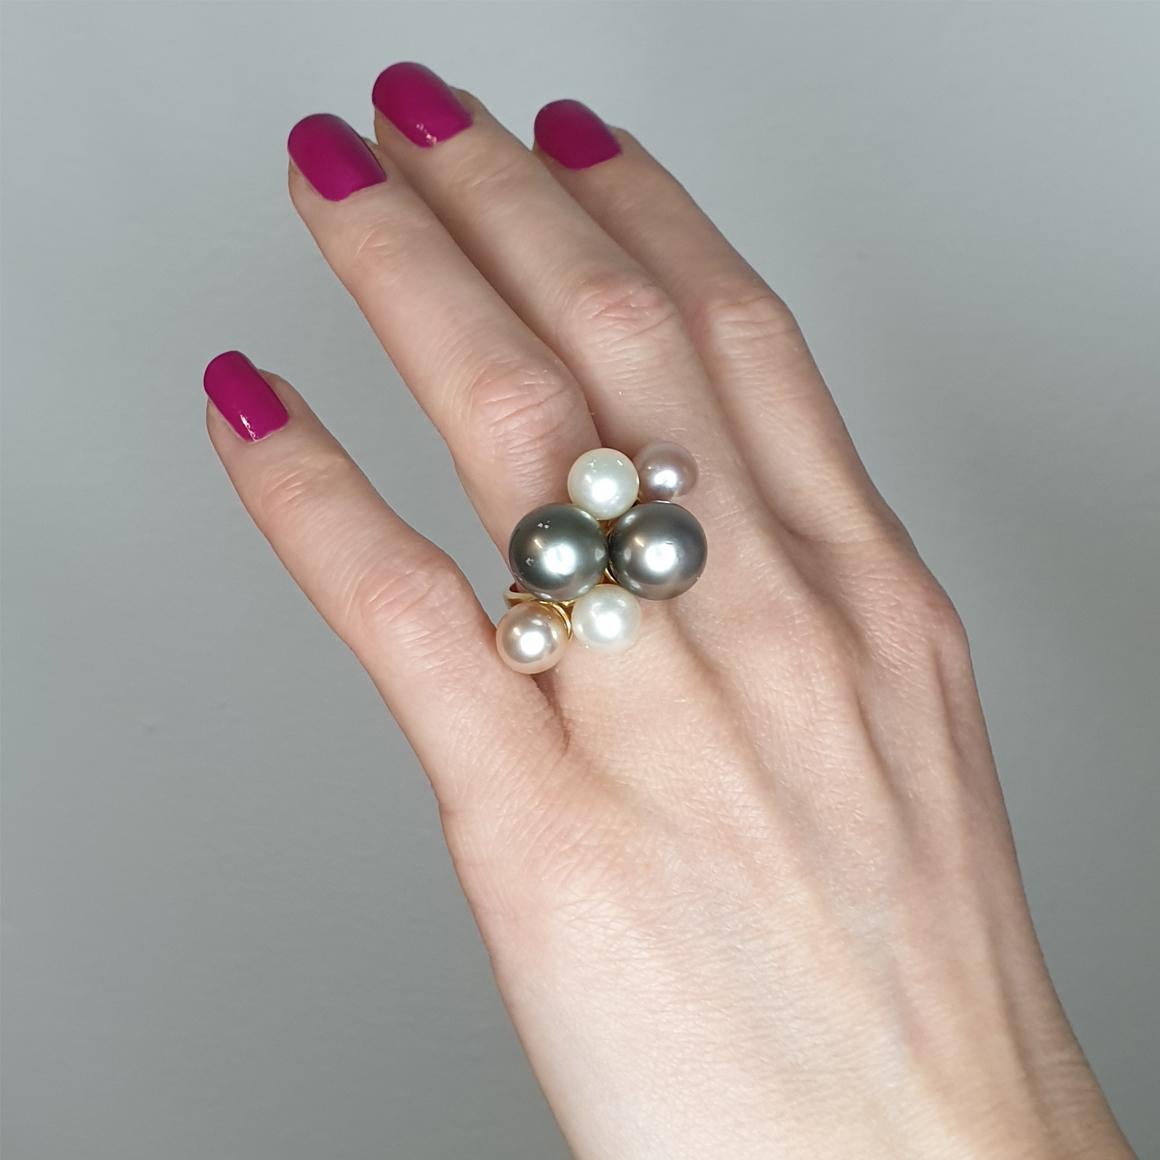 Very amazing ring with Thaiti pearls handemade in Italy by Stanoppi Jewellery since 1948.

g.14,10
Size of Ring :  EU 12 -  USA 6,5   Size of  Pearls  mm 11  e mm 8

All Stanoppi Jewelry is new and has never been previously owned or worn. Each item